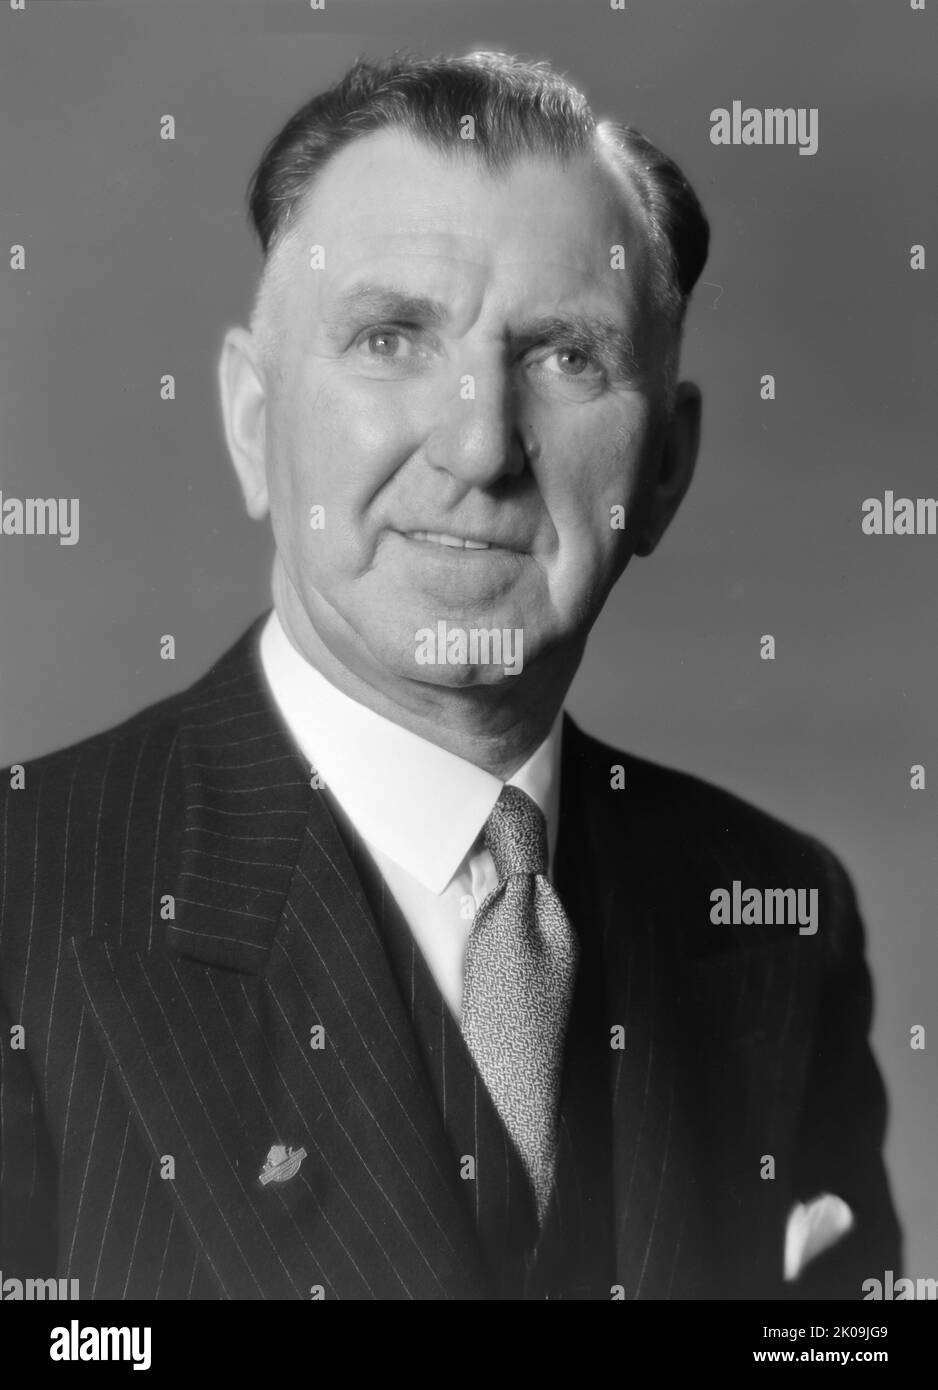 Sir Sidney Holland (1893 - 1961) New Zealand politician who served as the 25th prime minister of New Zealand from 13 December 1949 to 20 September 1957. He was instrumental in the creation and consolidation of the New Zealand National Party, which was to dominate New Zealand politics for much of the second half of the 20th century. Stock Photo